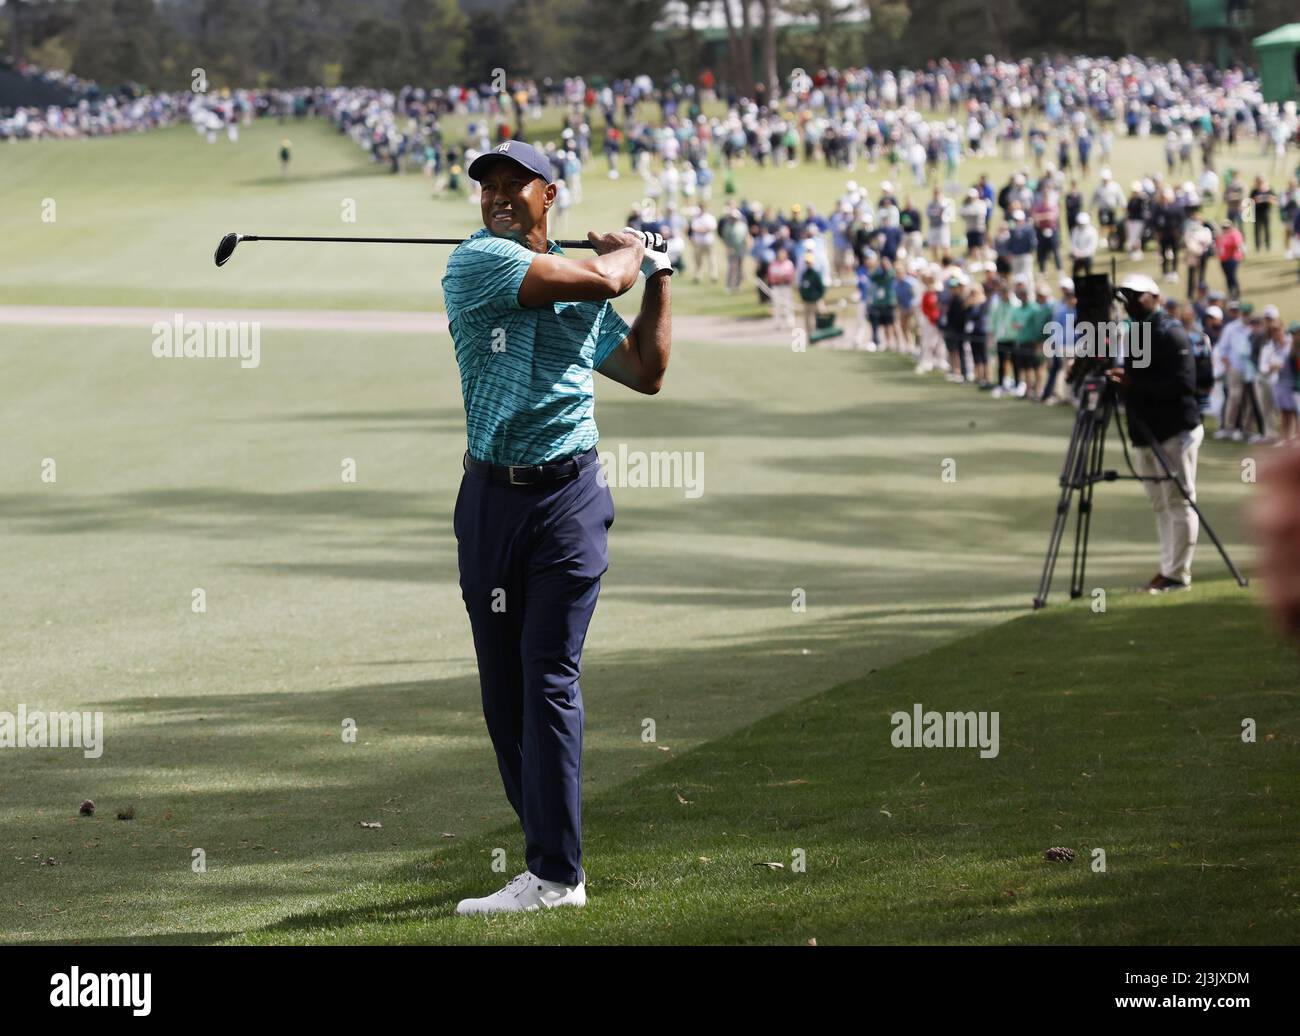 Augusta, USA. 08th Apr, 2022. Tiger Woods hits his second shot to the 8th hole in the second round of The Masters golf tournament at Augusta National Golf Club in Augusta, Georgia on Friday, April 8, 2022. Photo by John Angelillo/UPI Credit: UPI/Alamy Live News Stock Photo